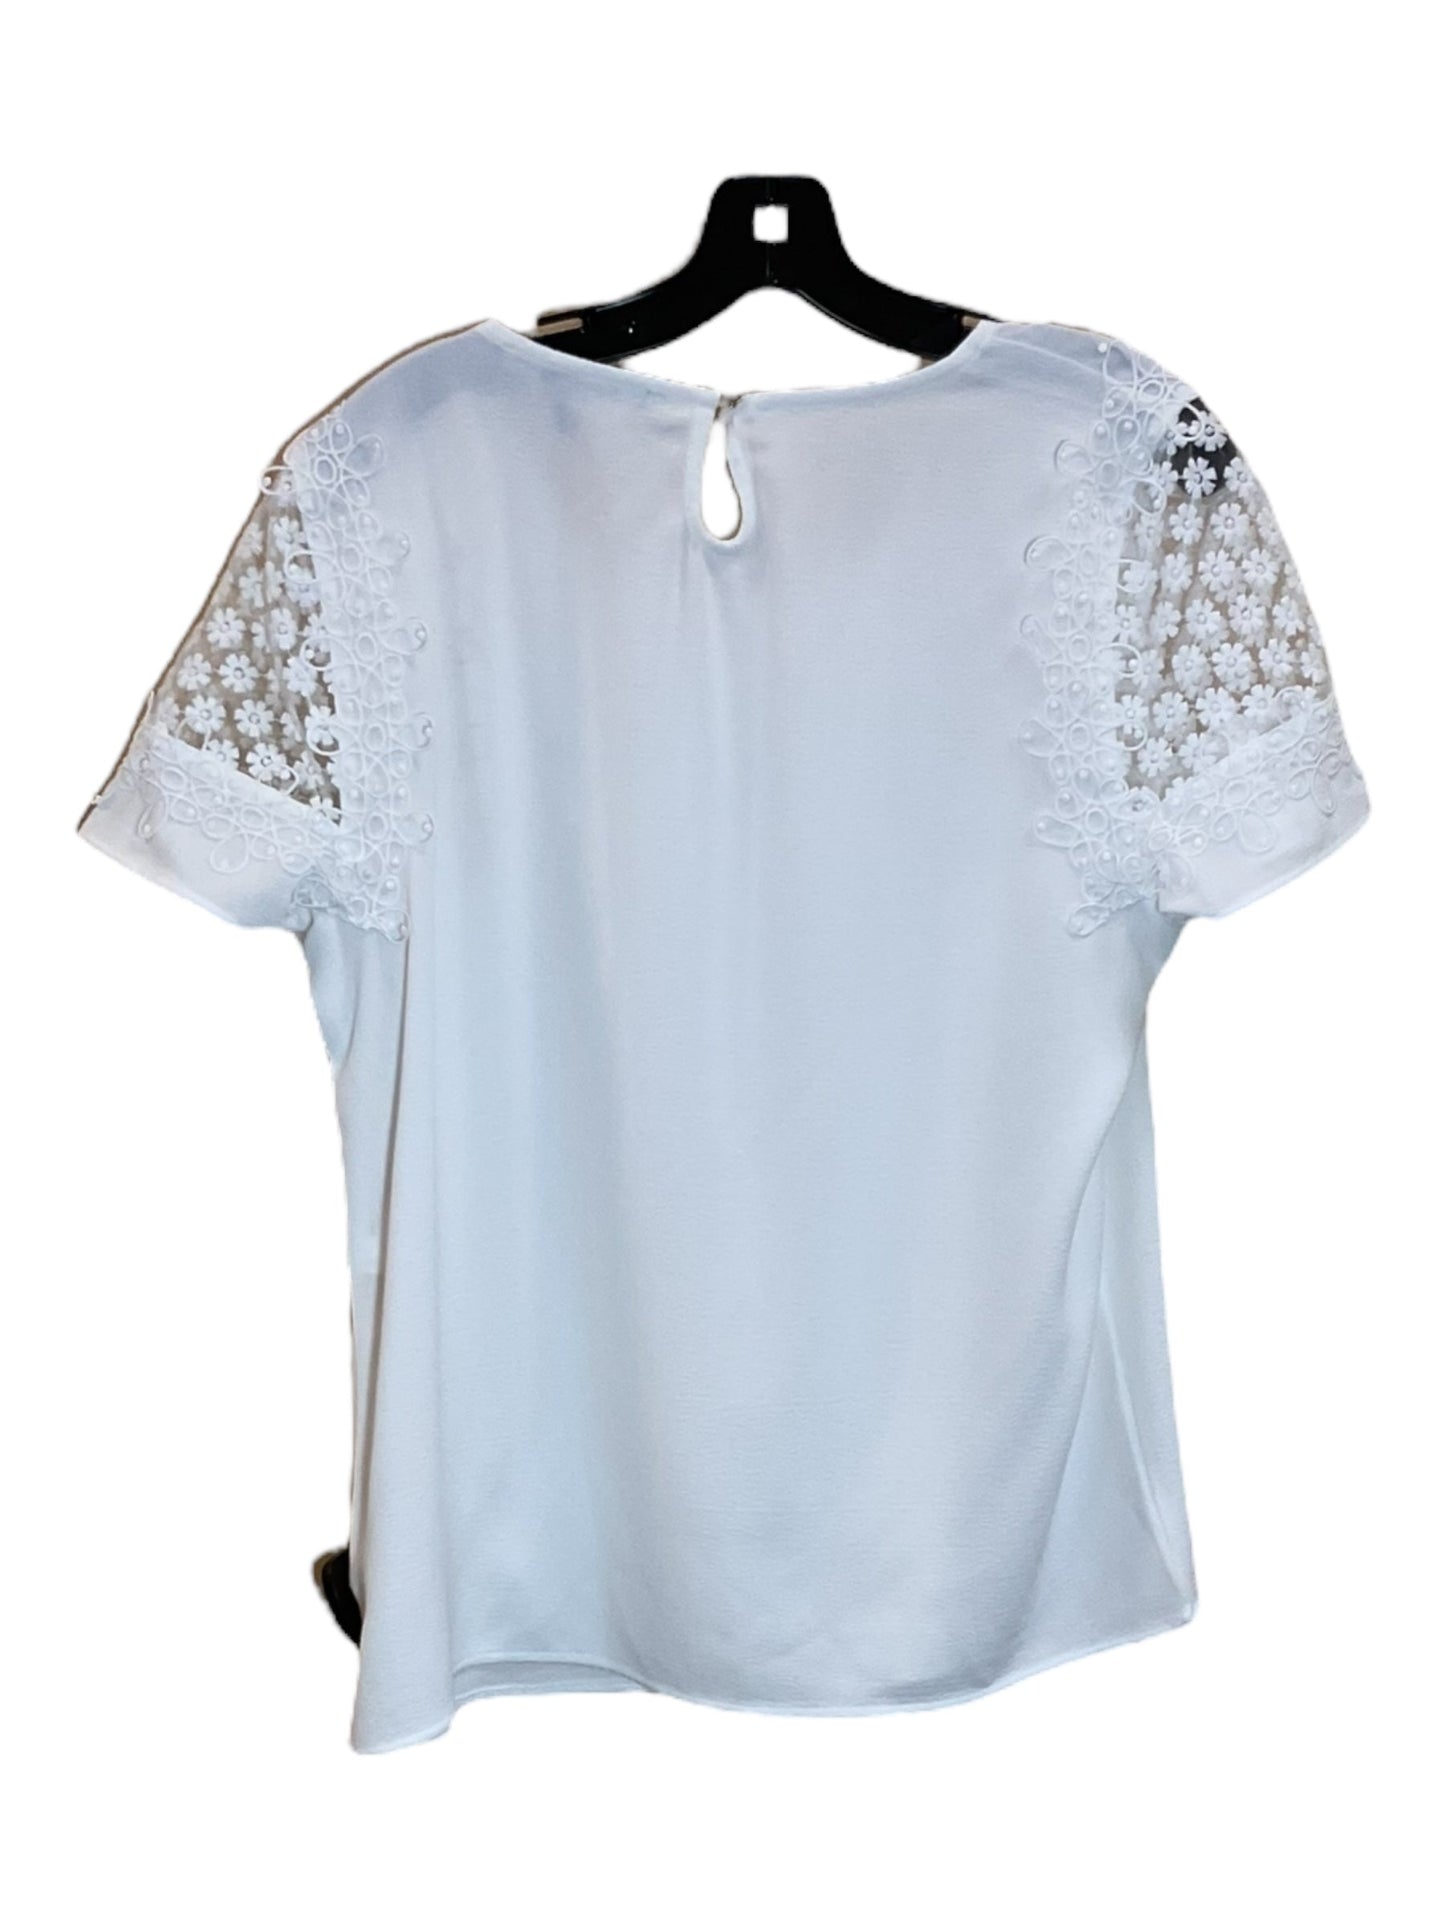 White Top Short Sleeve Marc New York, Size L